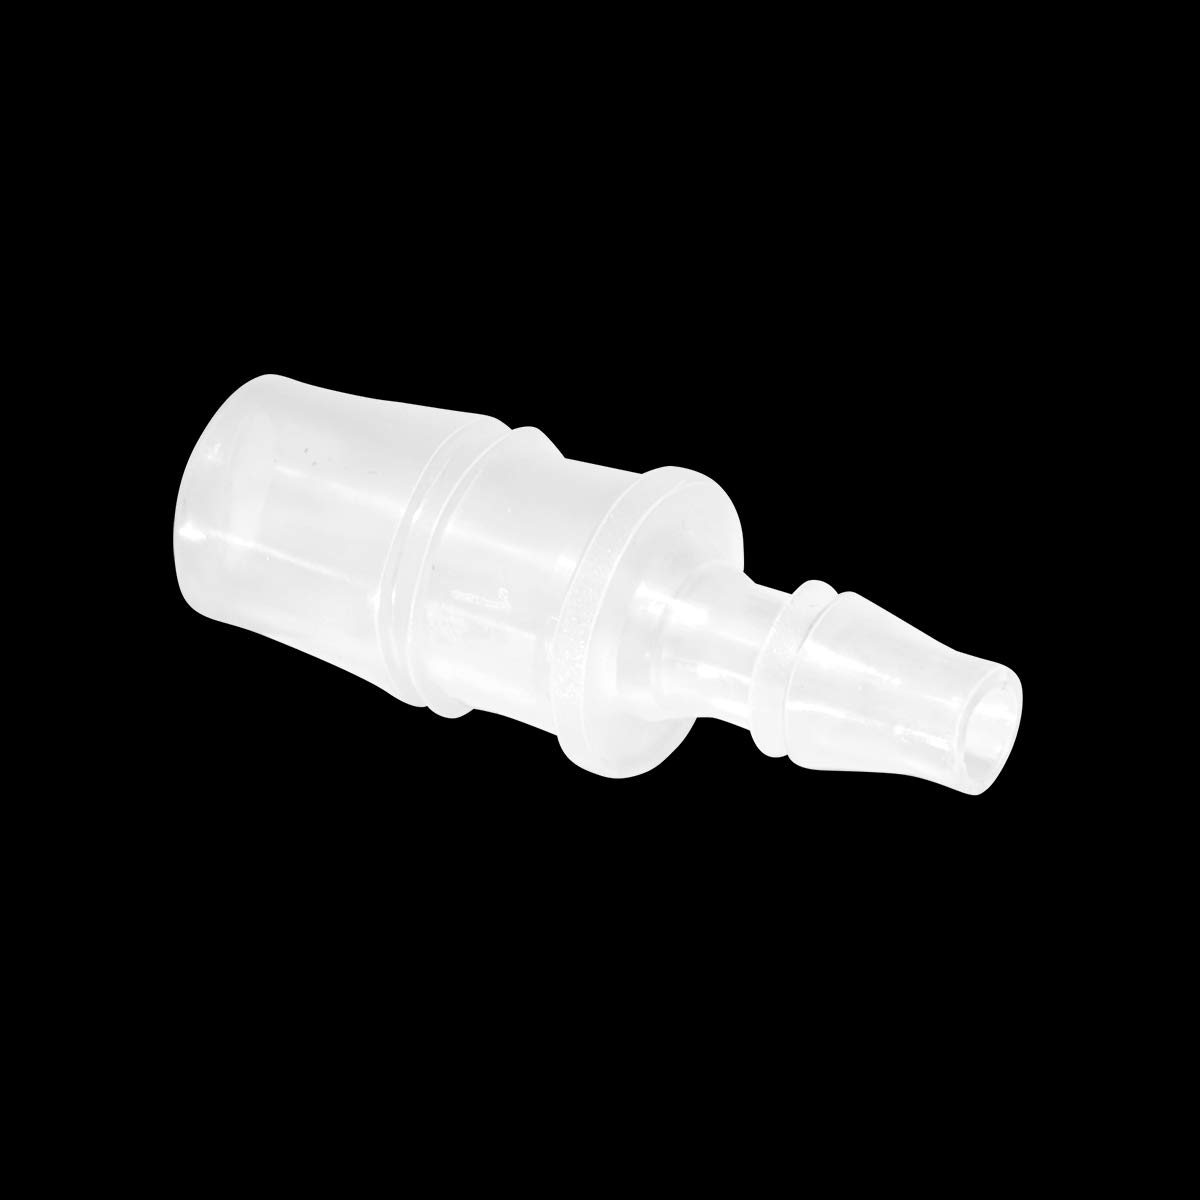 Feelers Plastic Hose Barb Reducer, 1/2" to 1/4" Barb Hose ID, Reducing Barb Brabed Fitting Mender Splicer Union for Coffee Maker and Aquarium Household Transport Fuel/Gas/Liquid/Air (Pack of 2) Animals & Pet Supplies > Pet Supplies > Fish Supplies > Aquarium & Pond Tubing Feelers   